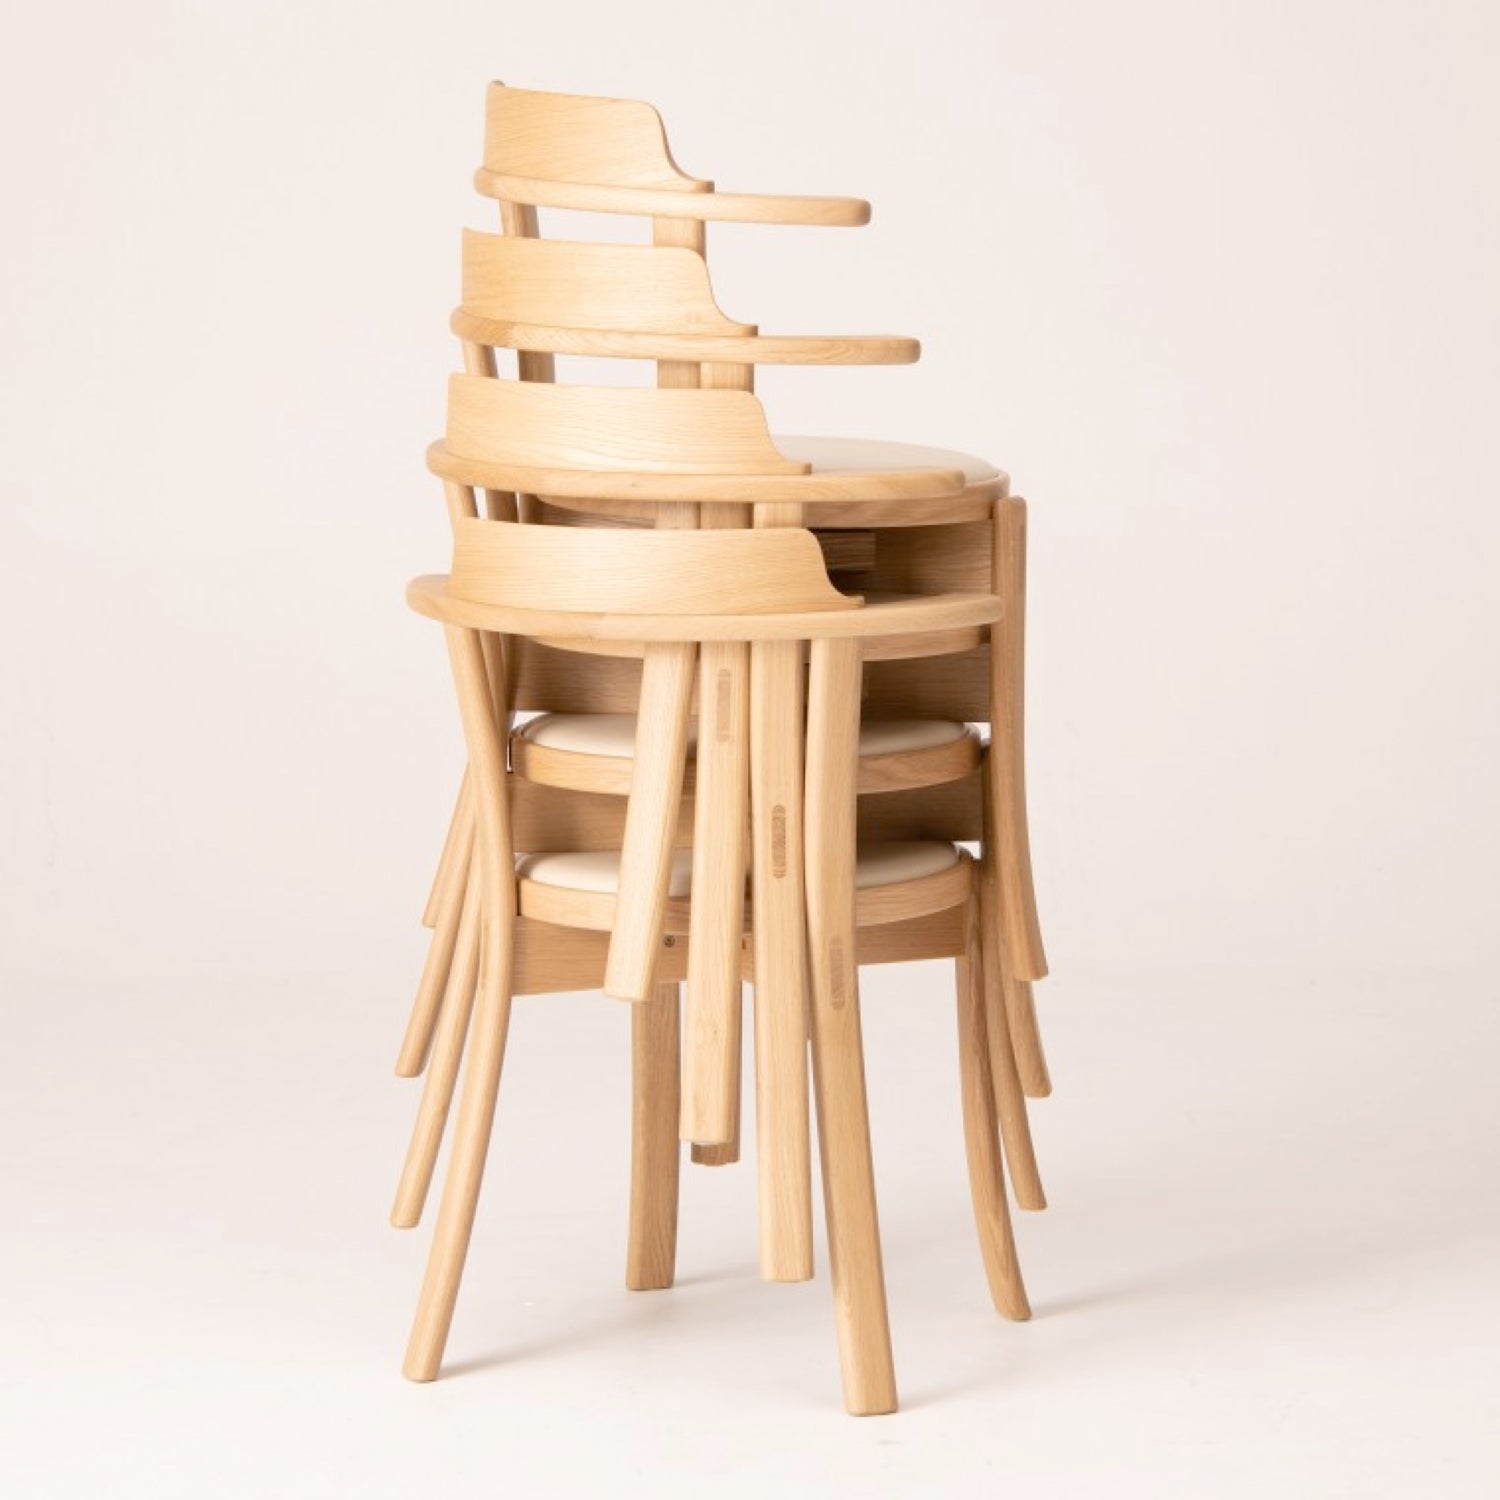 DARBY™ Chair by CondeHouse in stack of 4 chairs, available at ShopJapandi.com